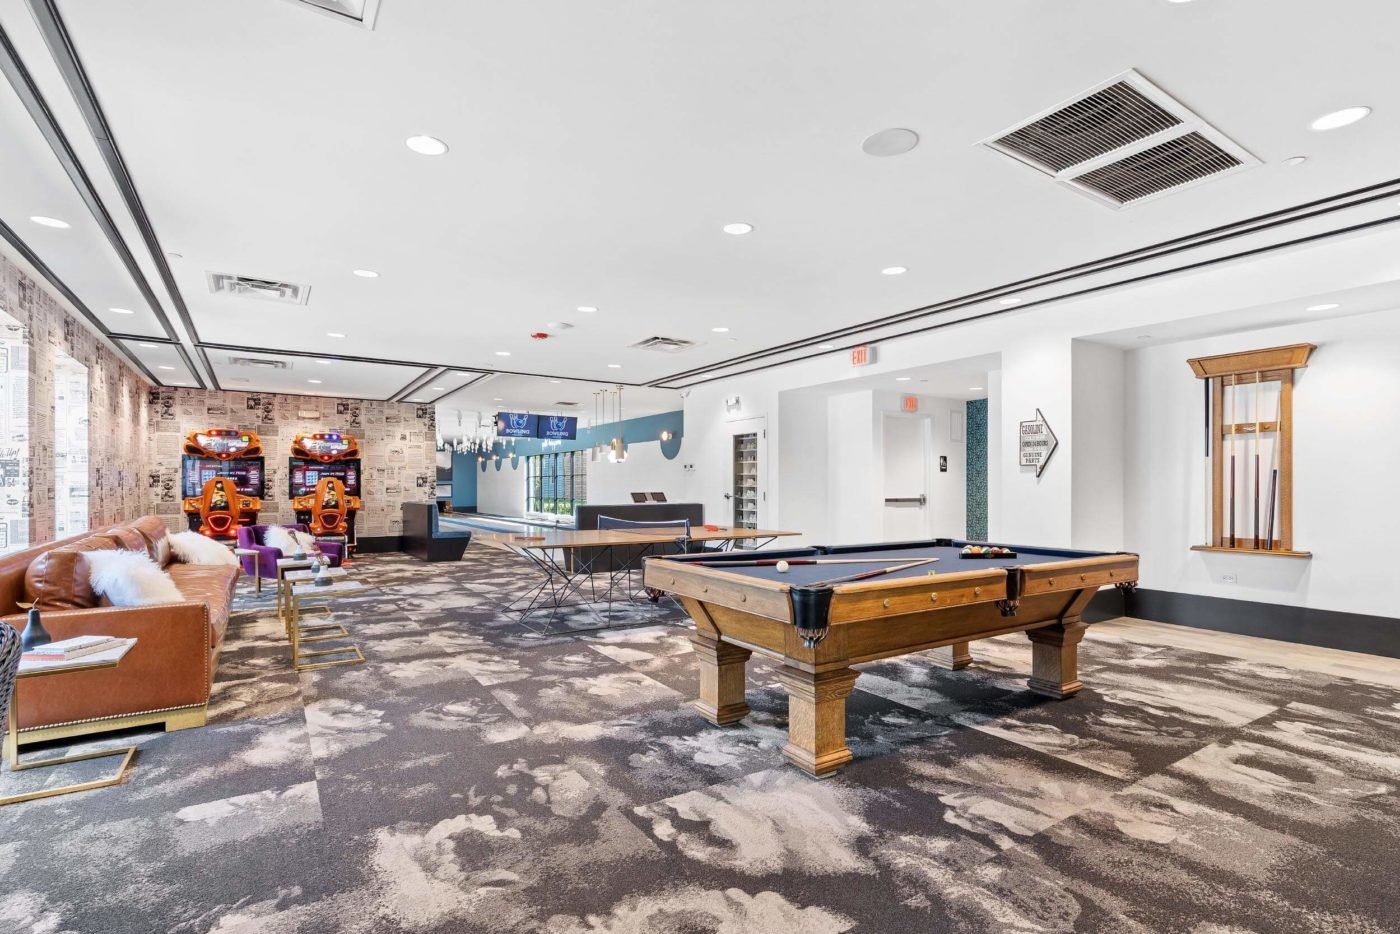 Commercial real estate photo of the entertaining area with pool table and bowling lanes